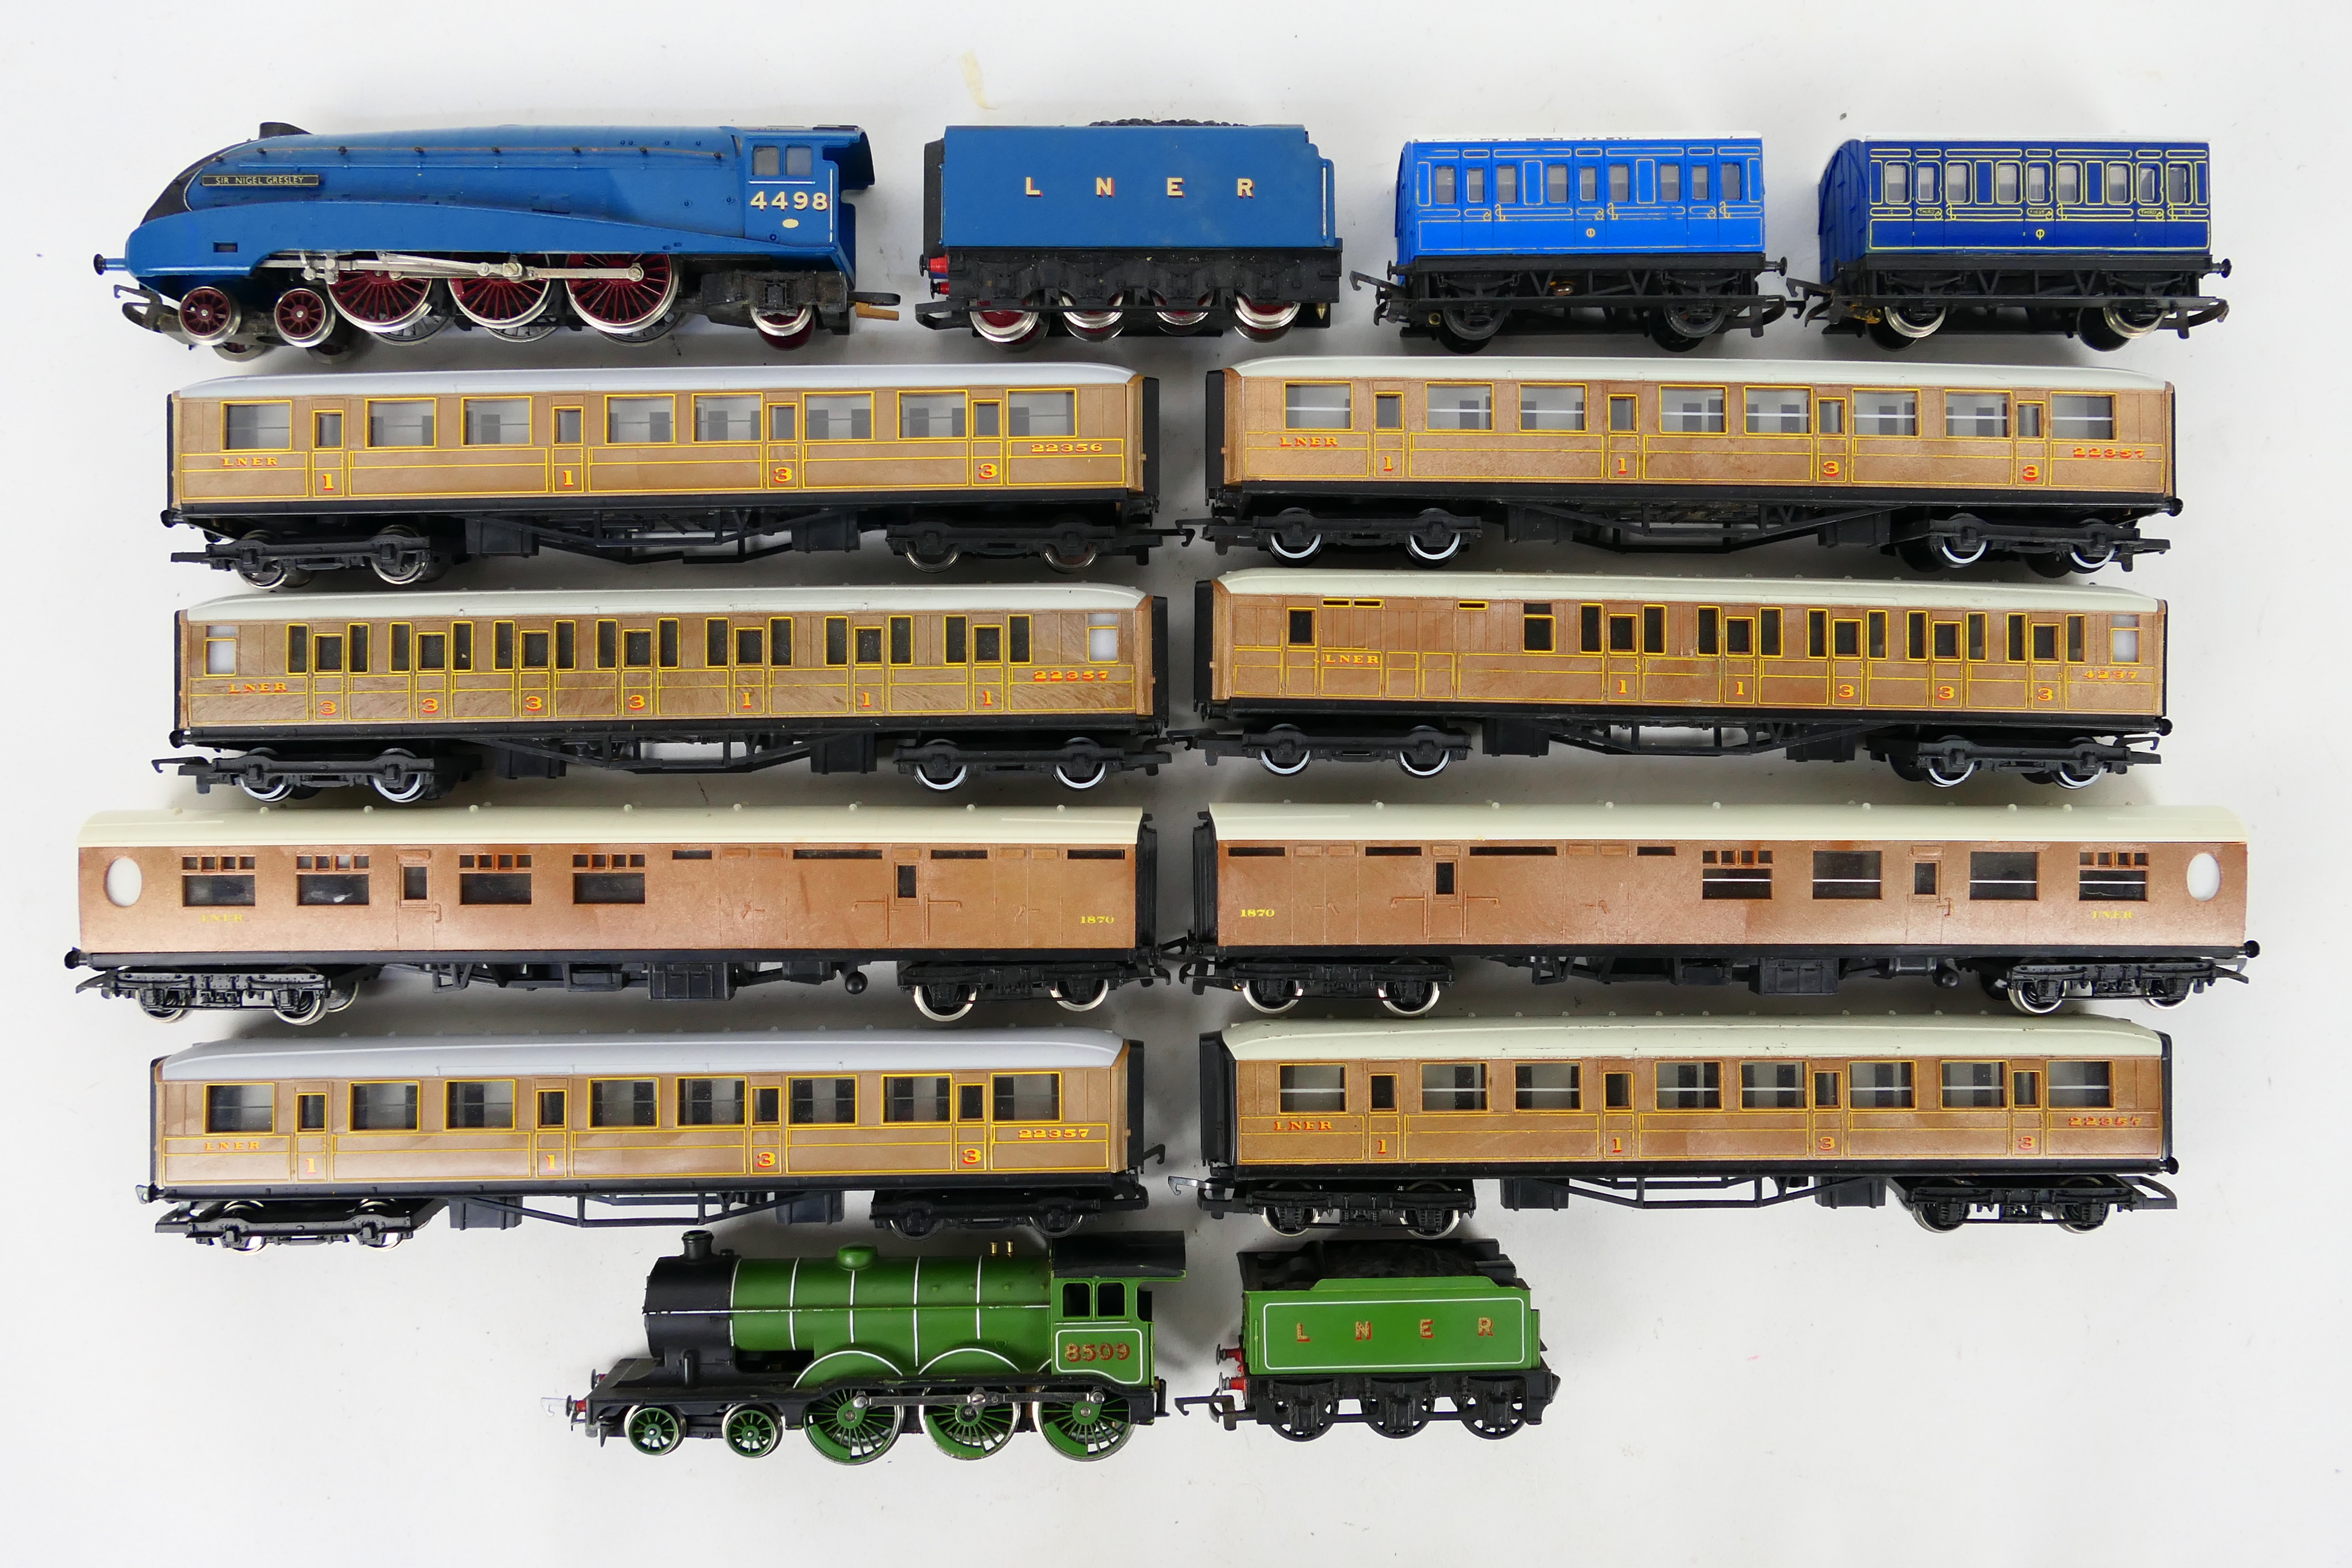 Hornby - Two unboxed Oo gauge steam locomotives and tenders with a group of unboxed passenger